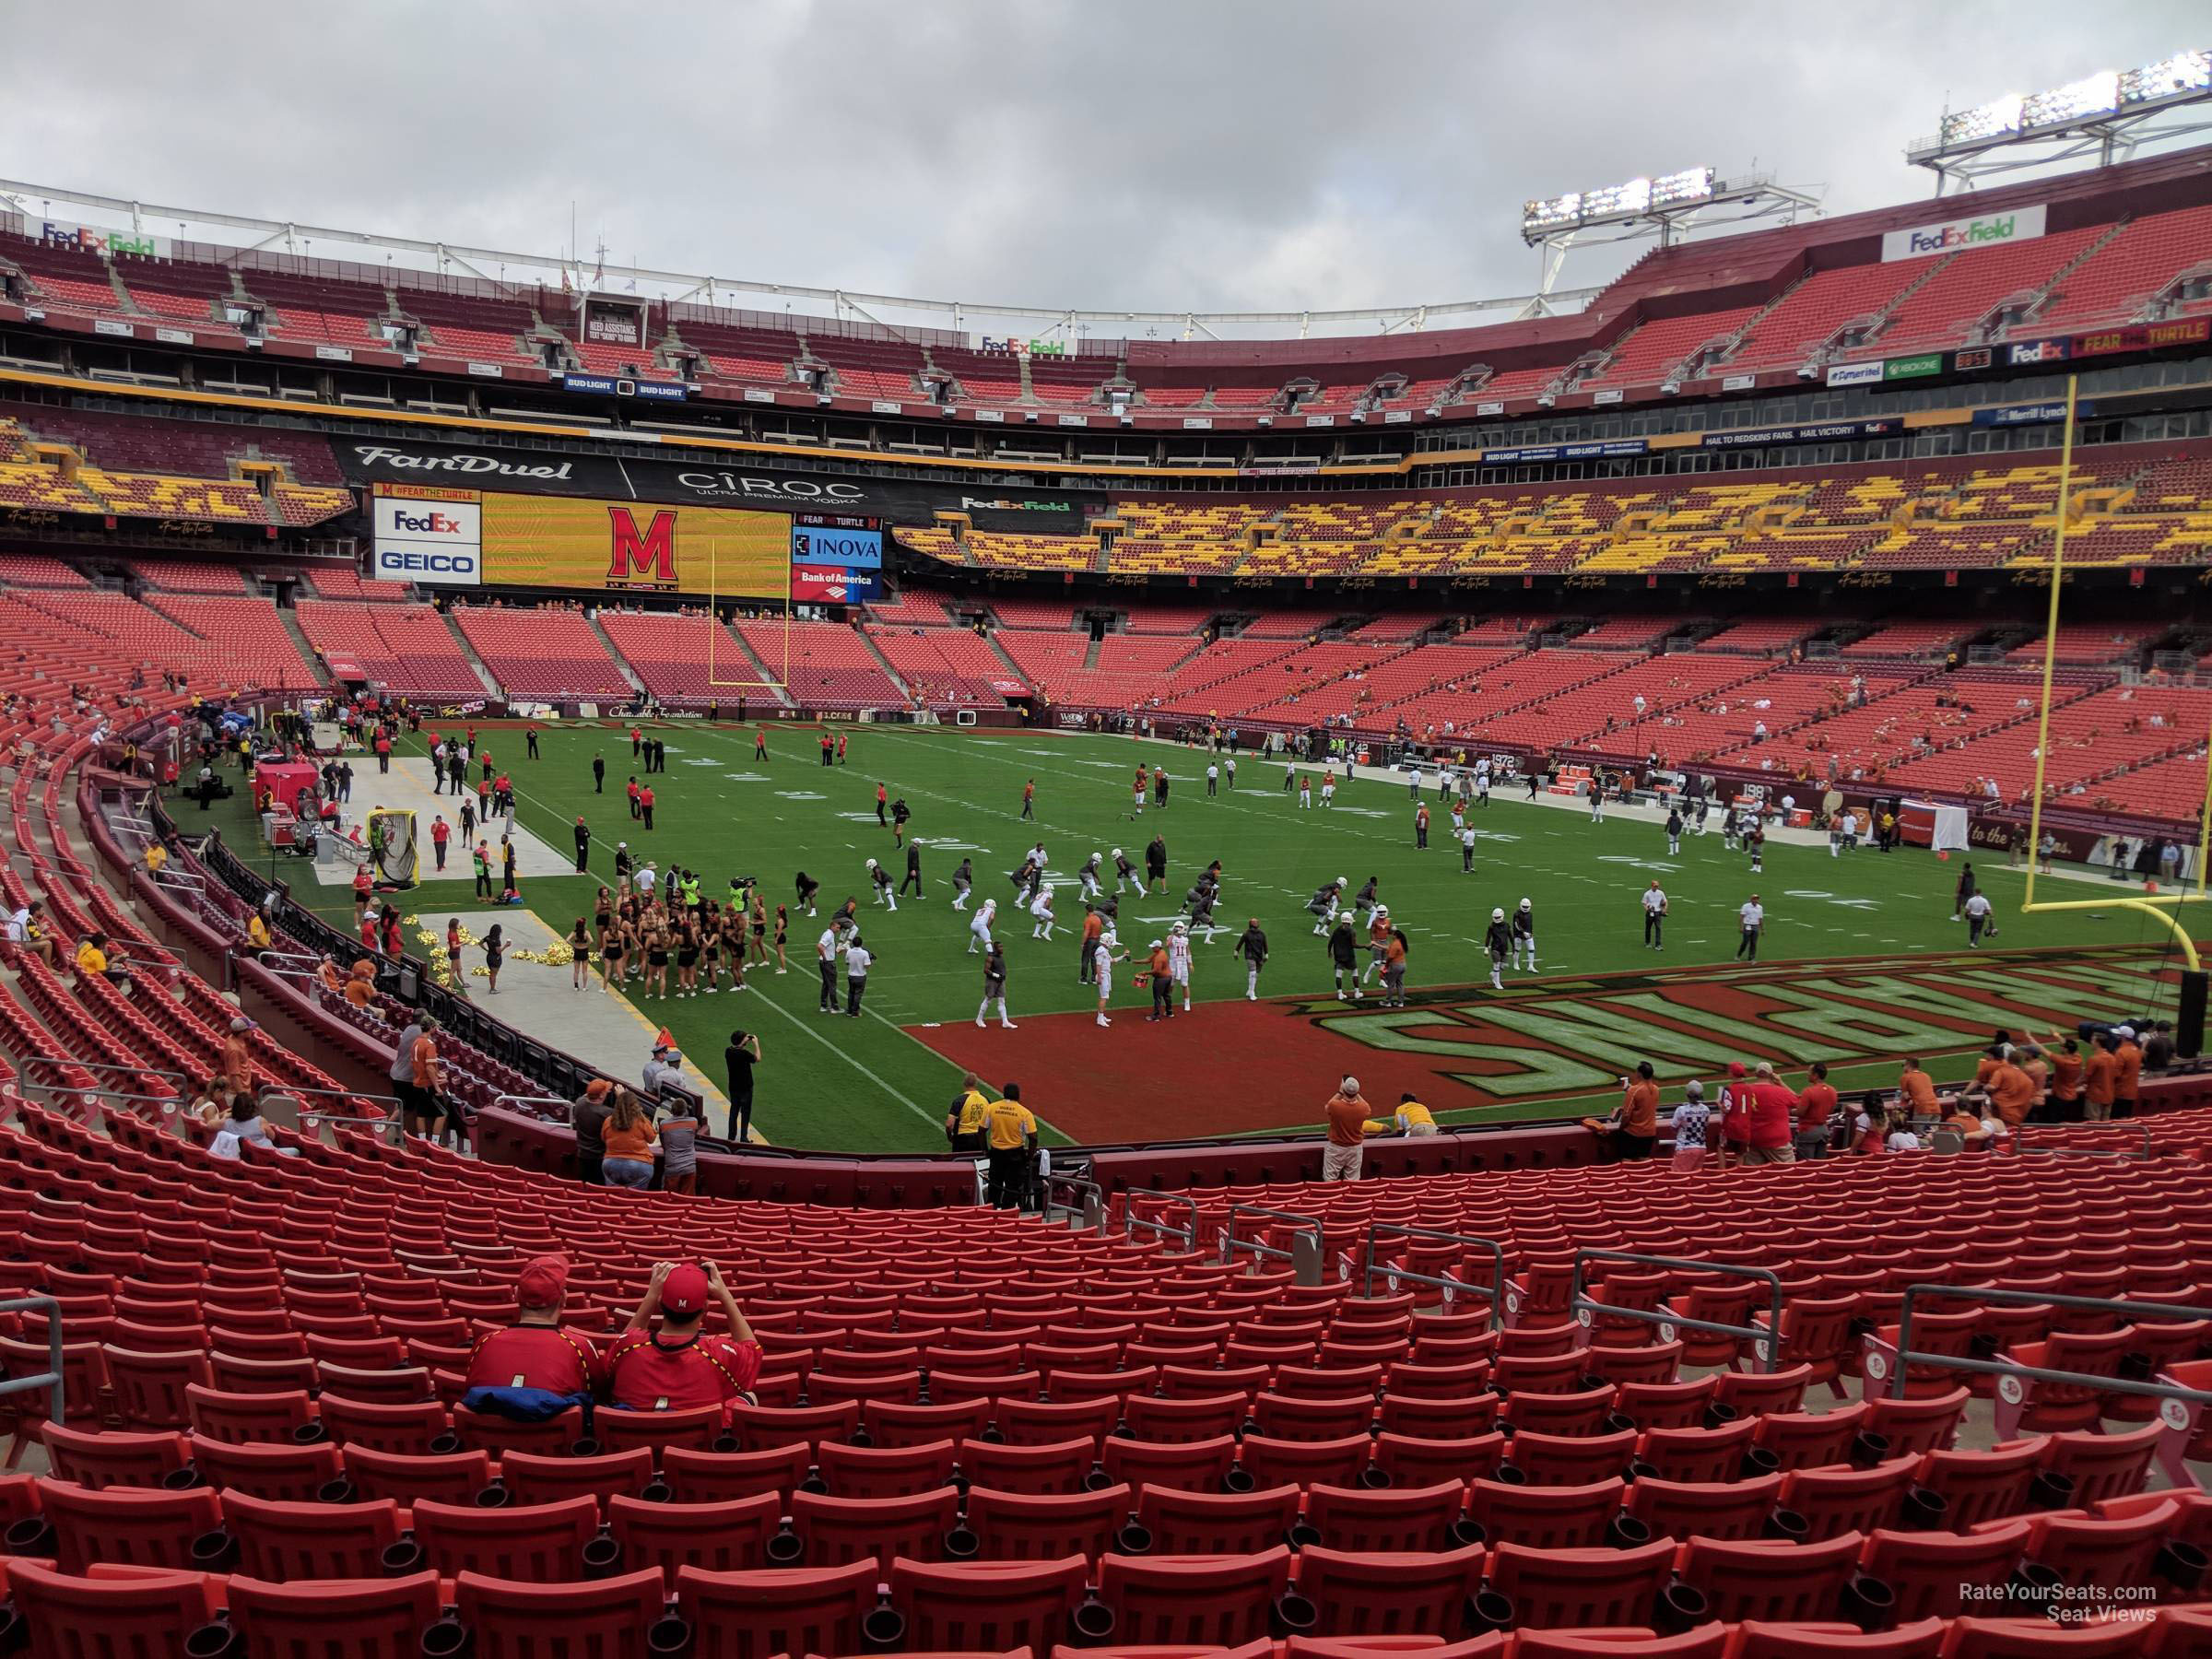 section 135, row 25 seat view  - fedexfield